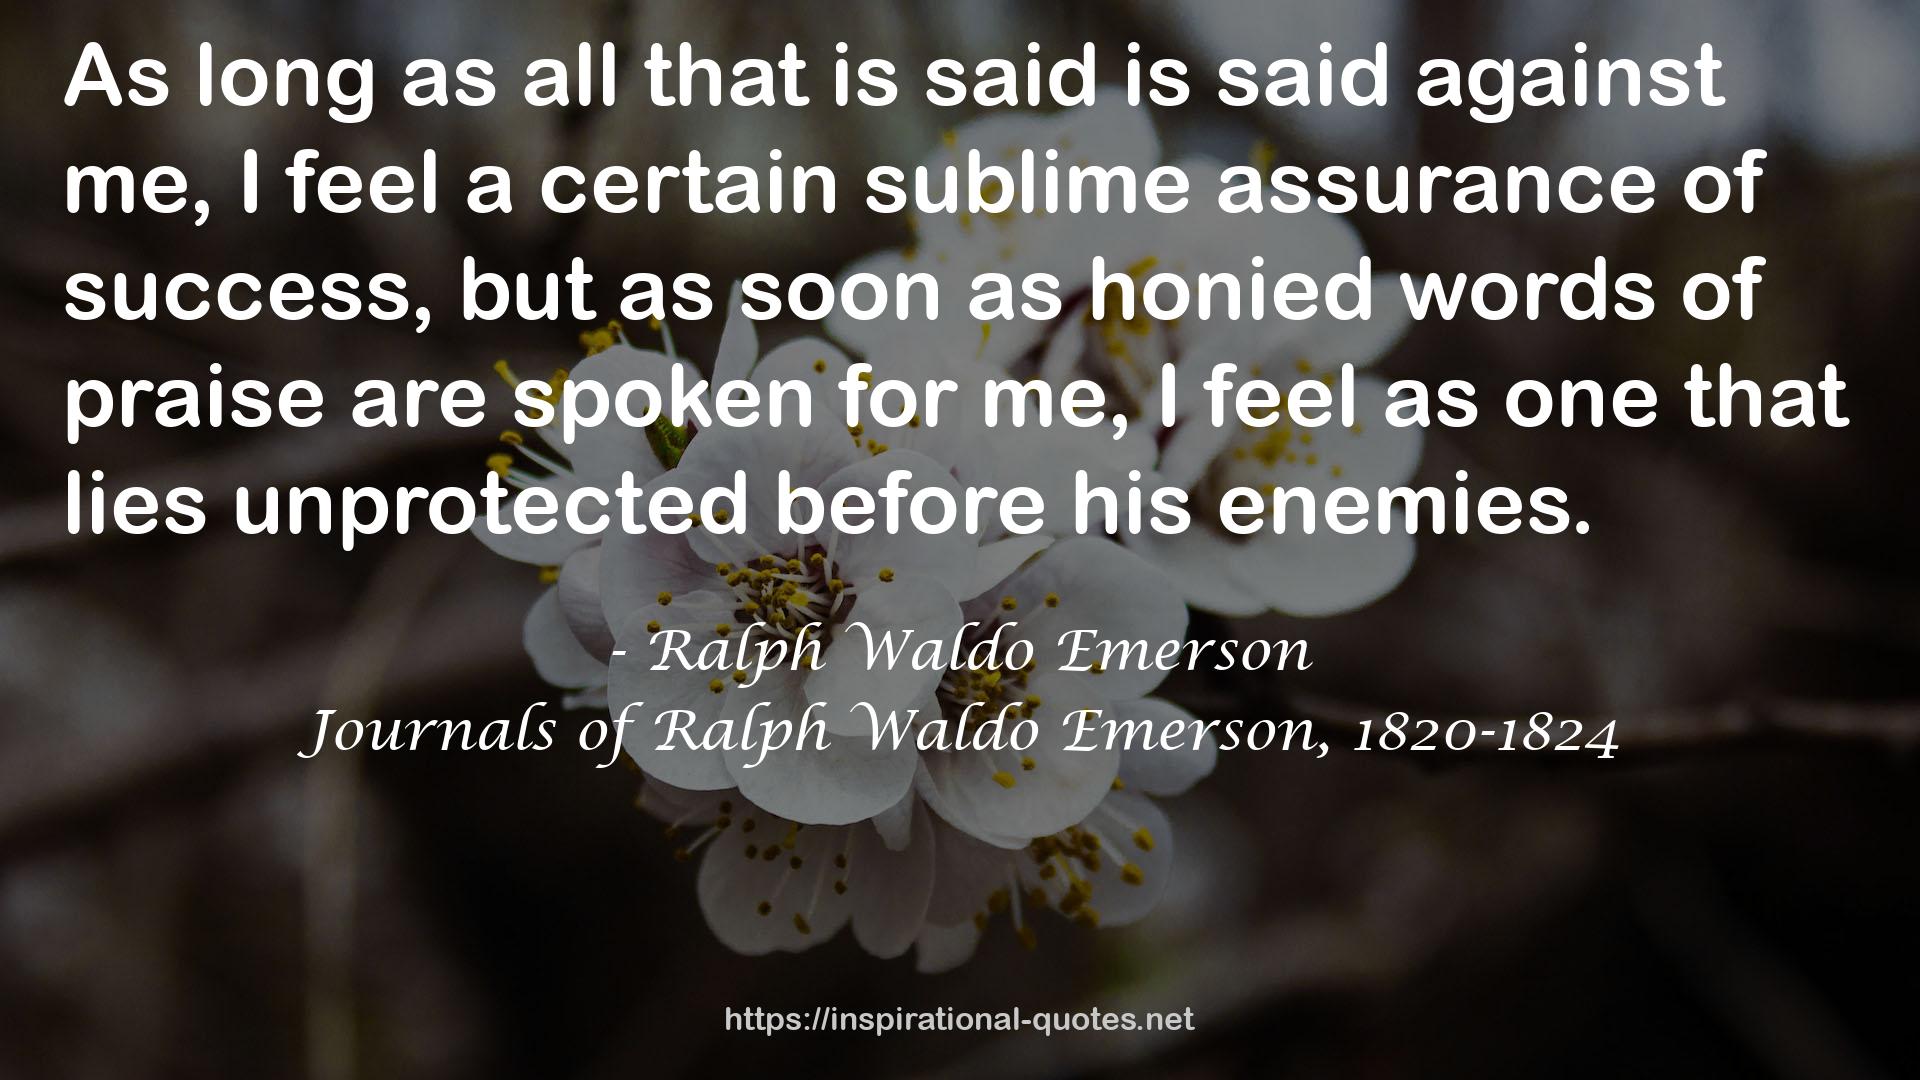 Journals of Ralph Waldo Emerson, 1820-1824 QUOTES